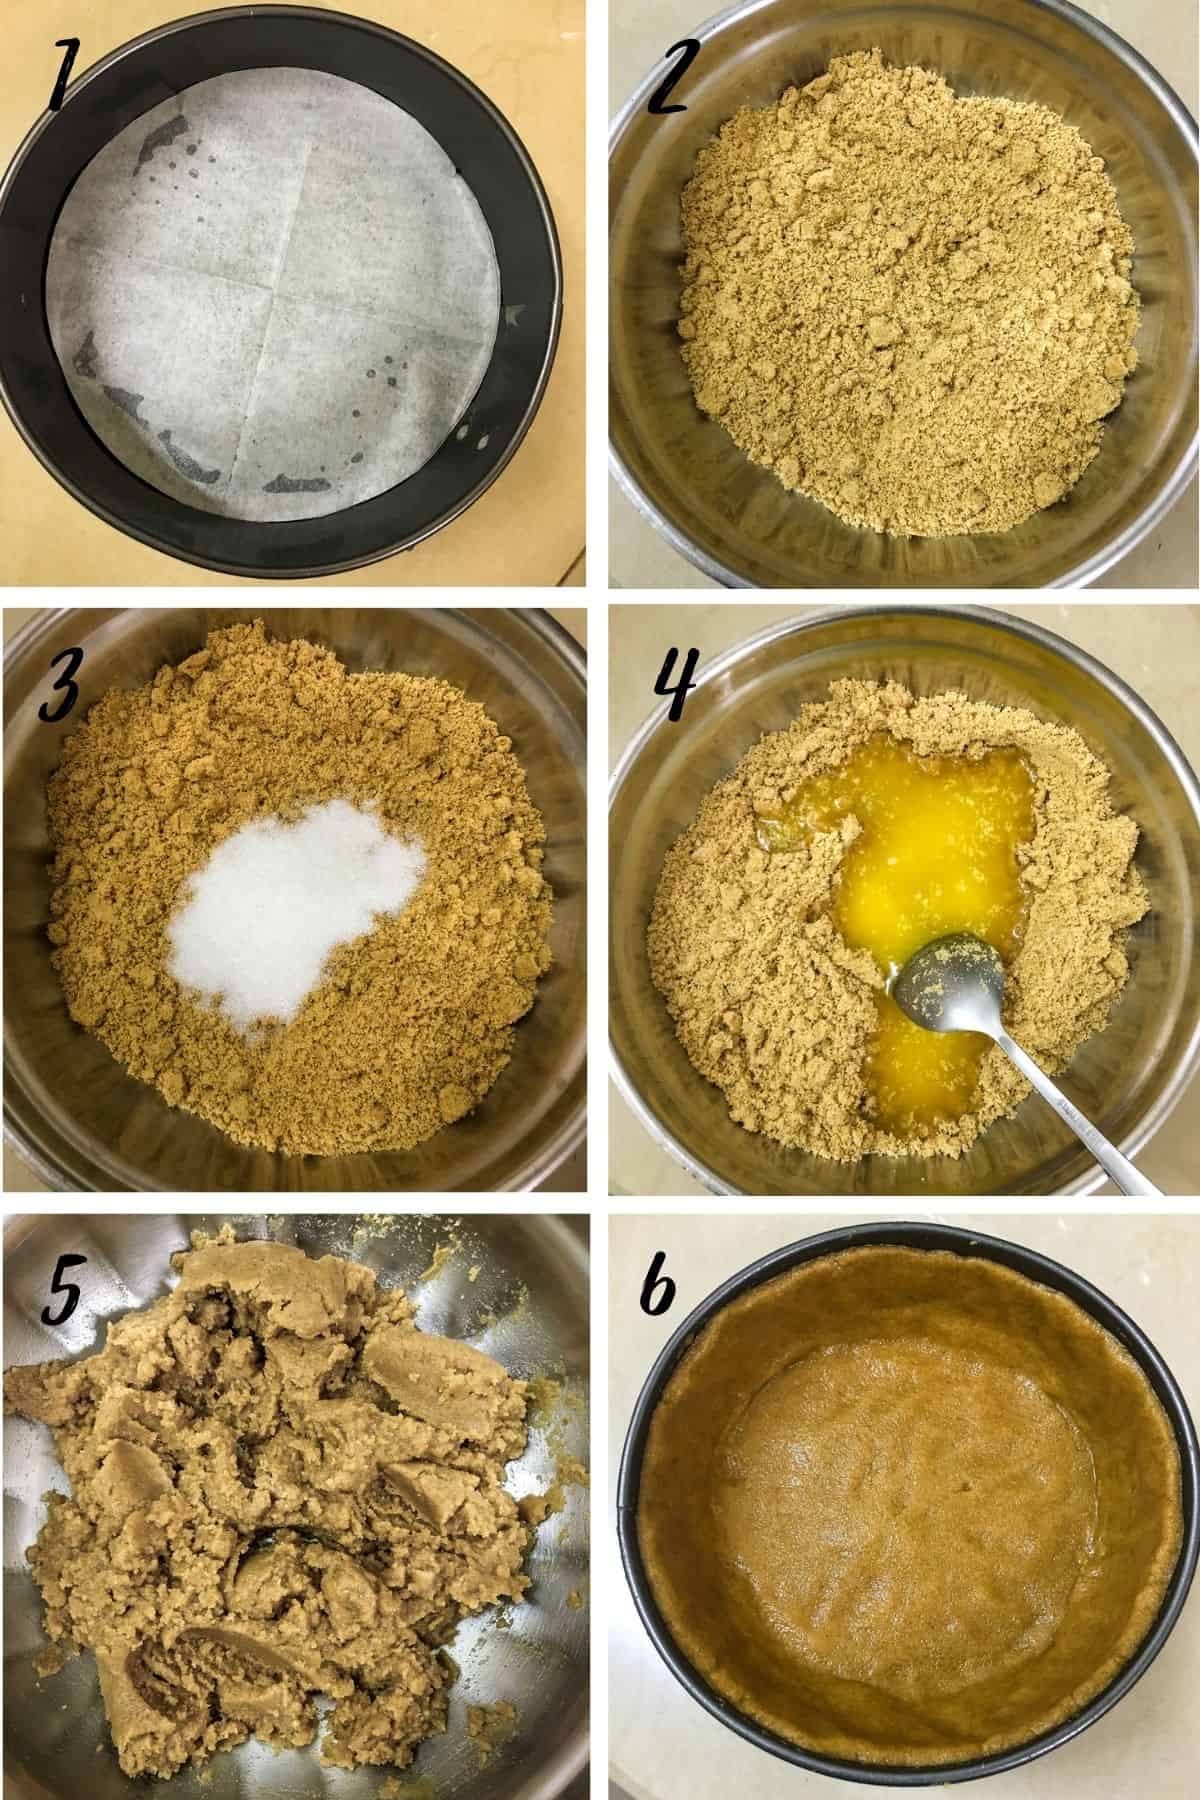 A poster of 6 images showing how to make cheesecake crust.